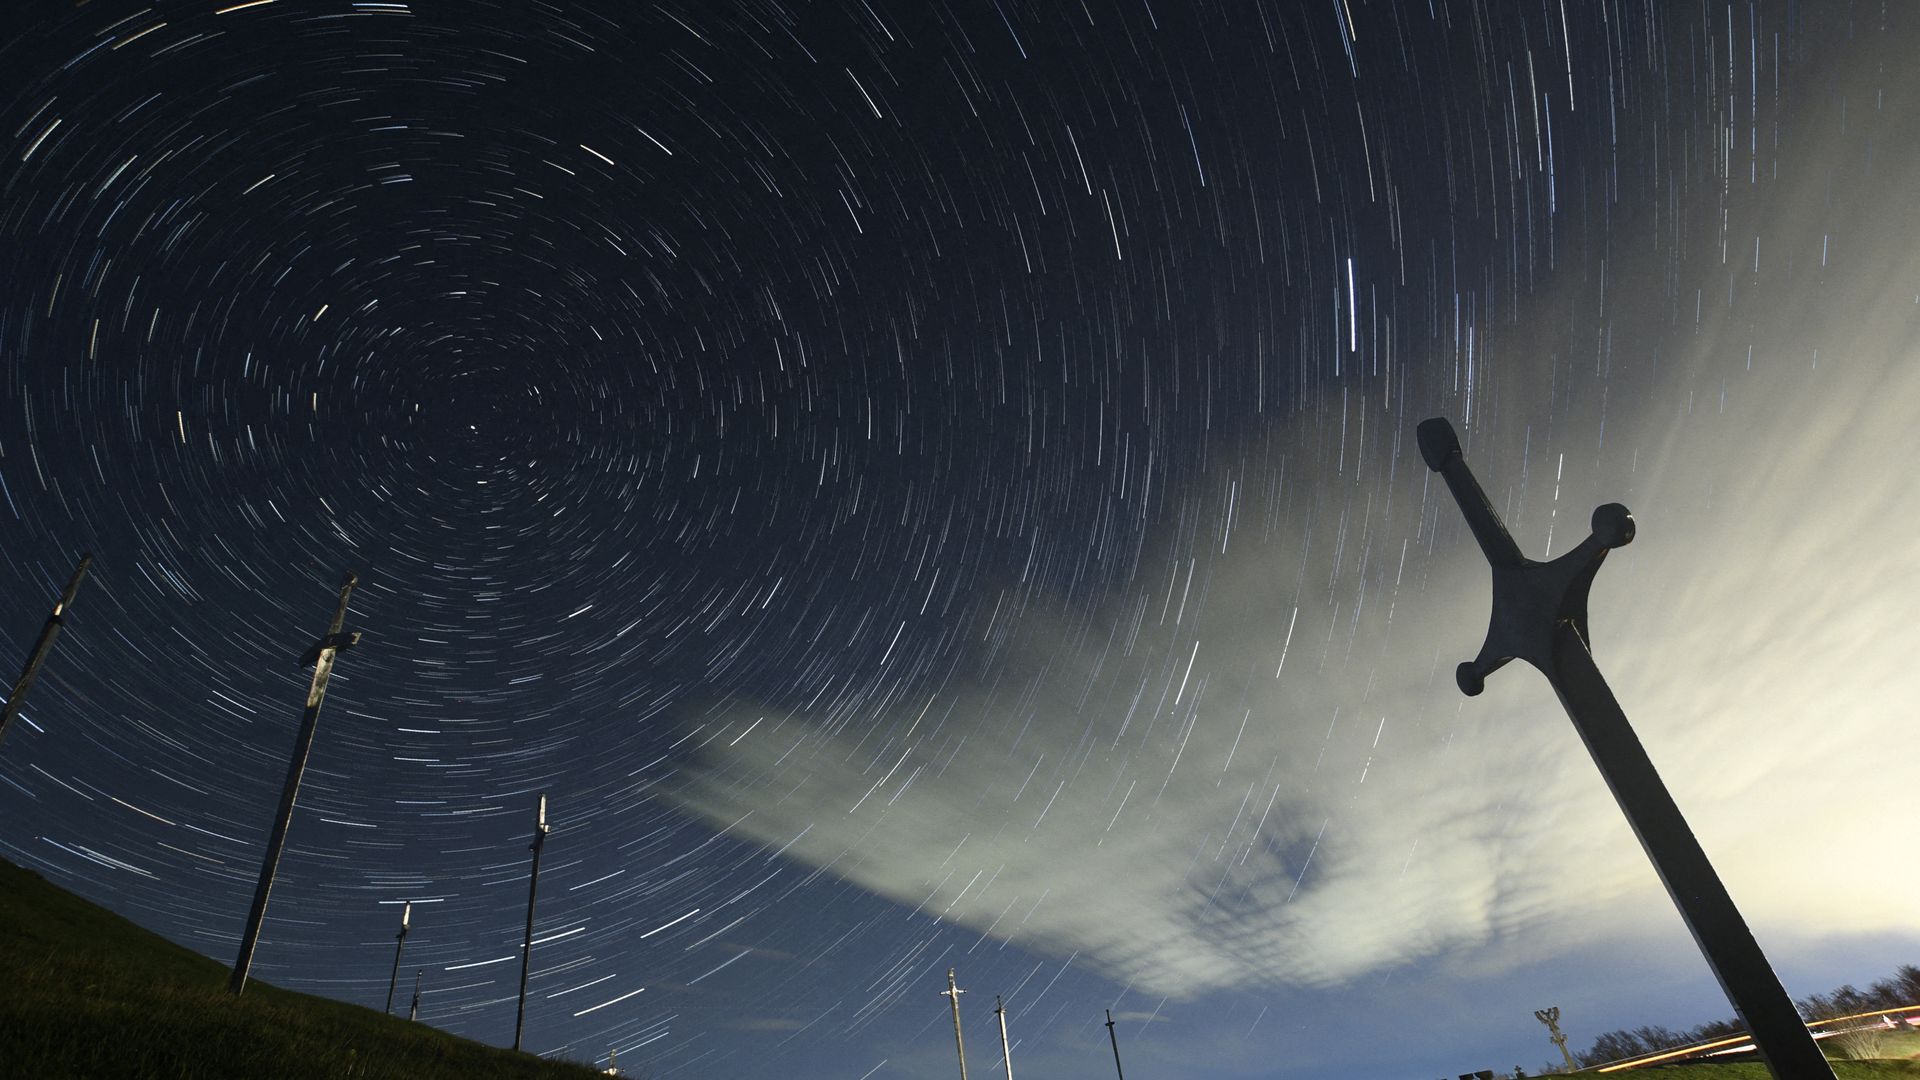 How to watch oldest annual meteor shower tonight - and where stargazers will have best view